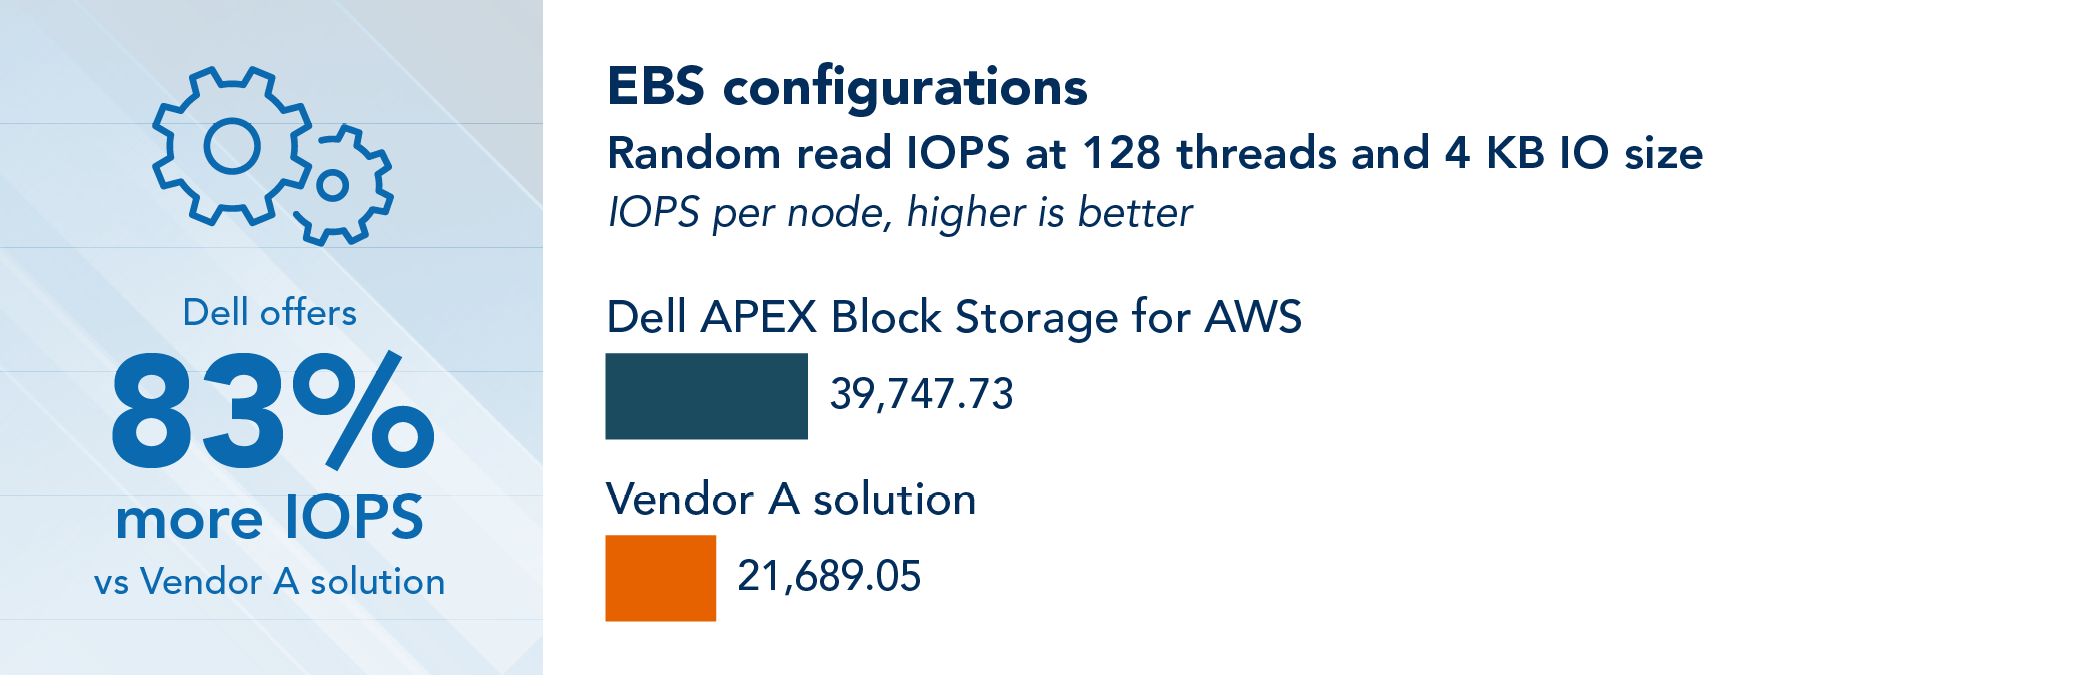 Comparison of random read IOPS at 128 threads and 4 KB I/O size for Dell APEX Block Storage for AWS and the Vendor A solution in their EBS configurations, where higher is better. Dell APEX Block Storage for AWS achieved 39,747.73 IOPS per node, and the Vendor A achieved gets 21,689.05 IOPS per node. Dell offers 83% more IOPS vs. Vendor A solution.